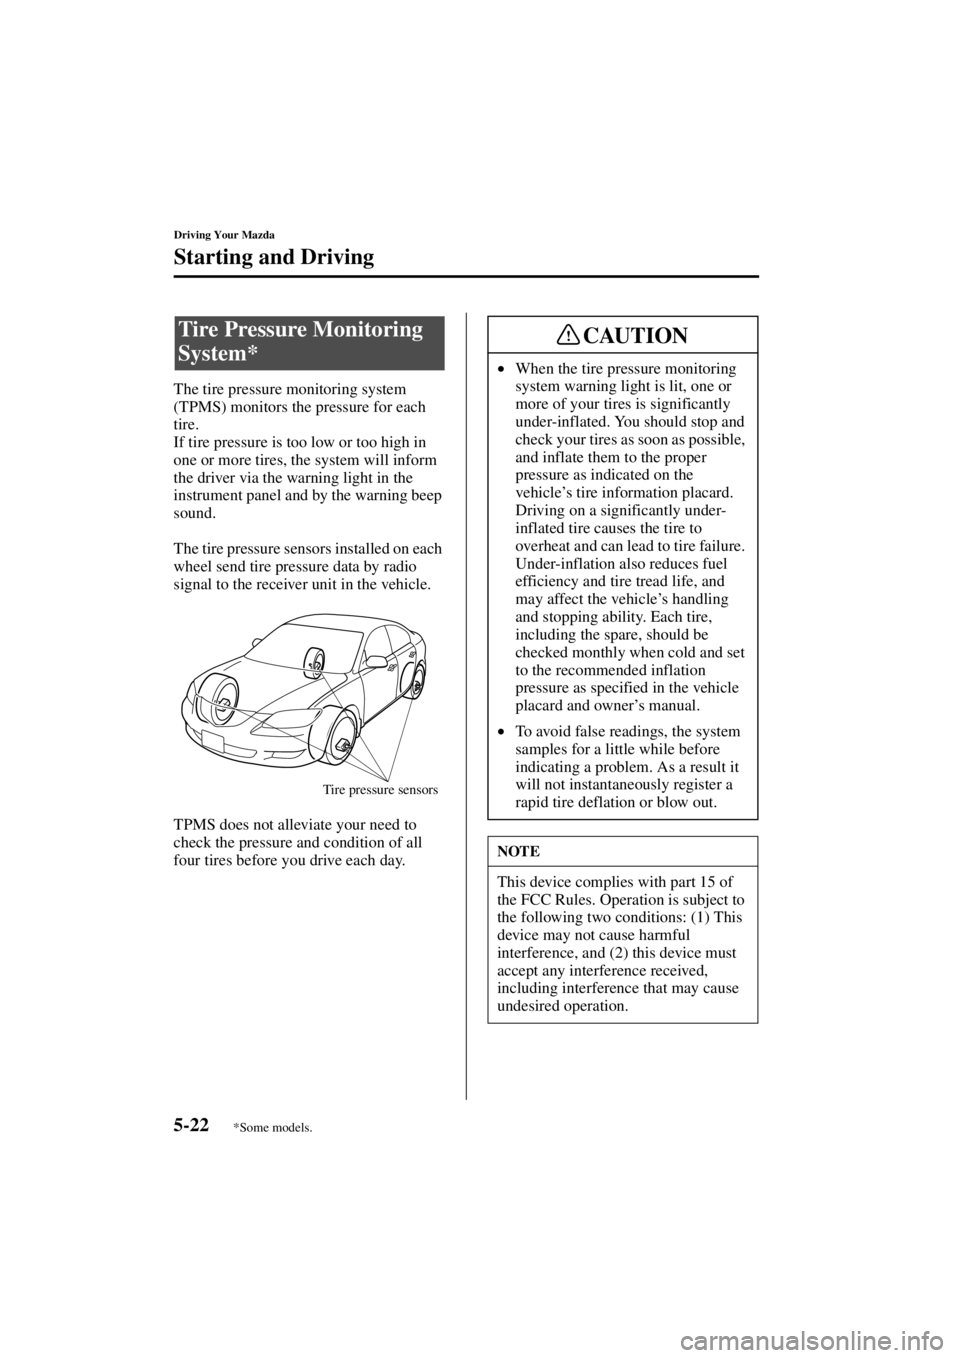 MAZDA MODEL 3 4-DOOR 2004 User Guide 5-22
Driving Your Mazda
Starting and Driving
Form No. 8S18-EA-03I
The tire pressure monitoring system 
(TPMS) monitors the pressure for each 
tire.
If tire pressure is too low or too high in 
one or m